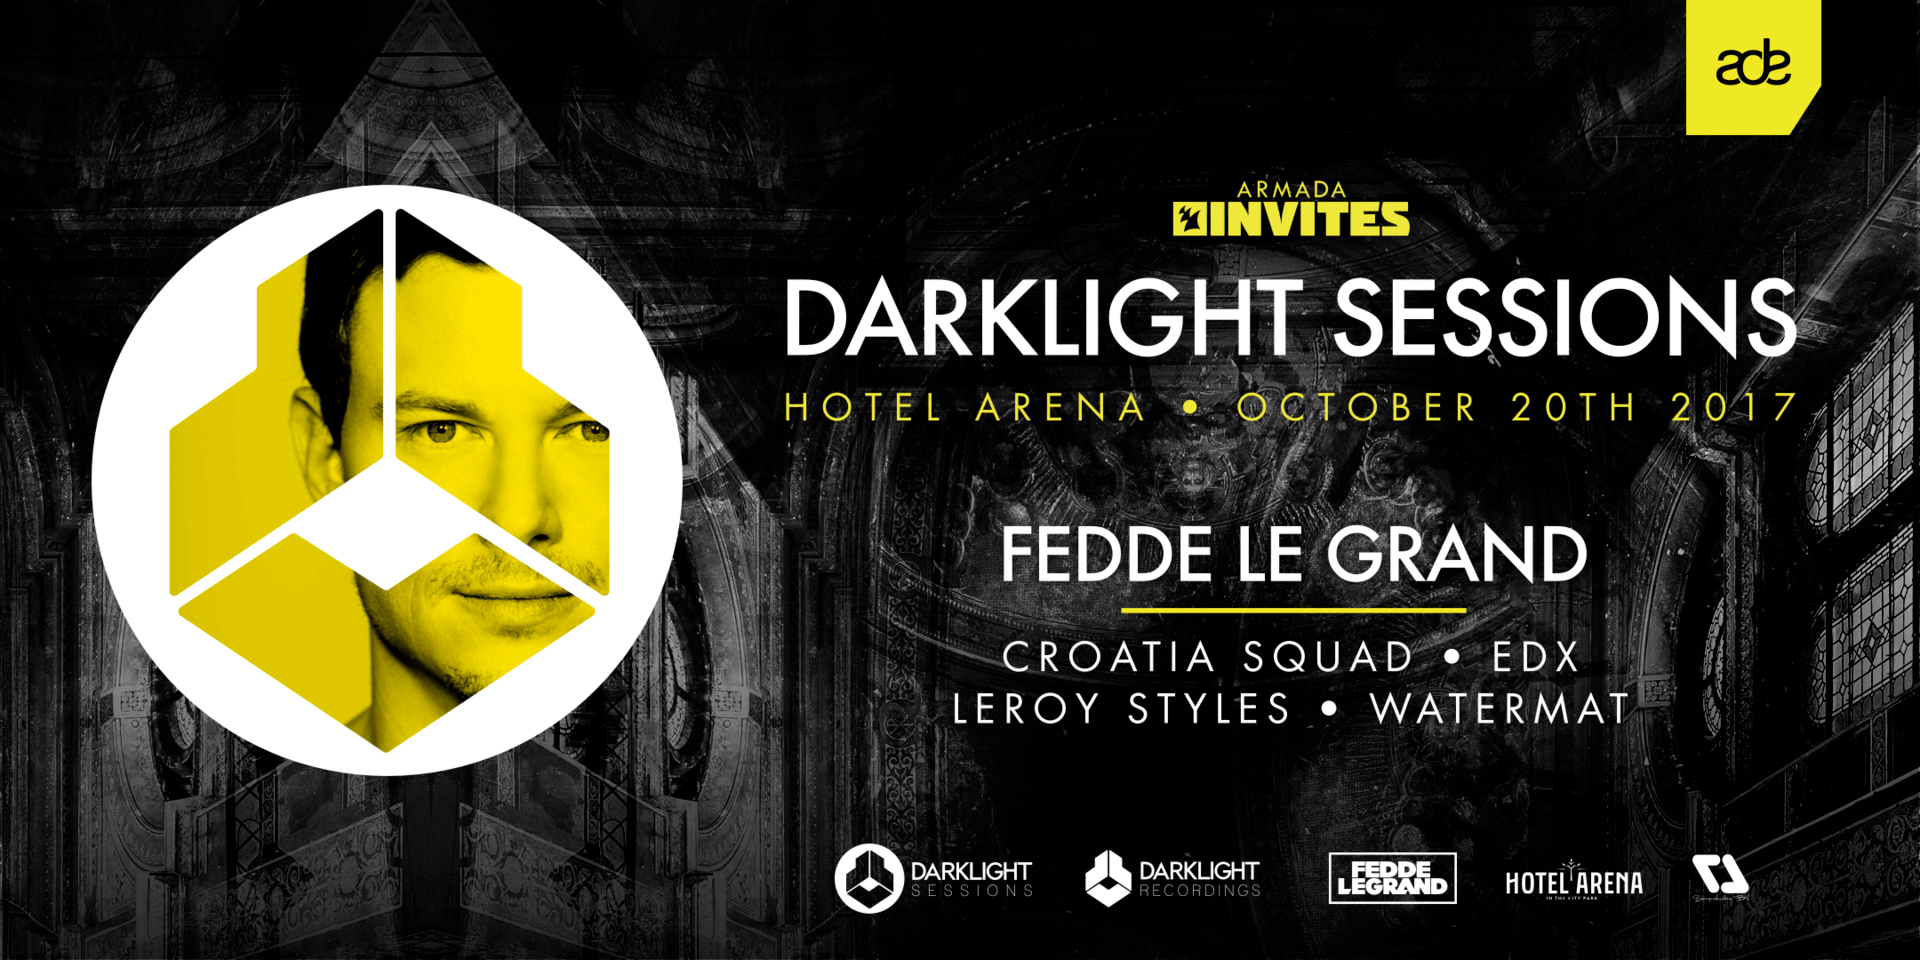 DARKLIGHT SESSIONS BY FEDDE LE GRAND X ARMADA INVITES [PICTURES ONLINE]